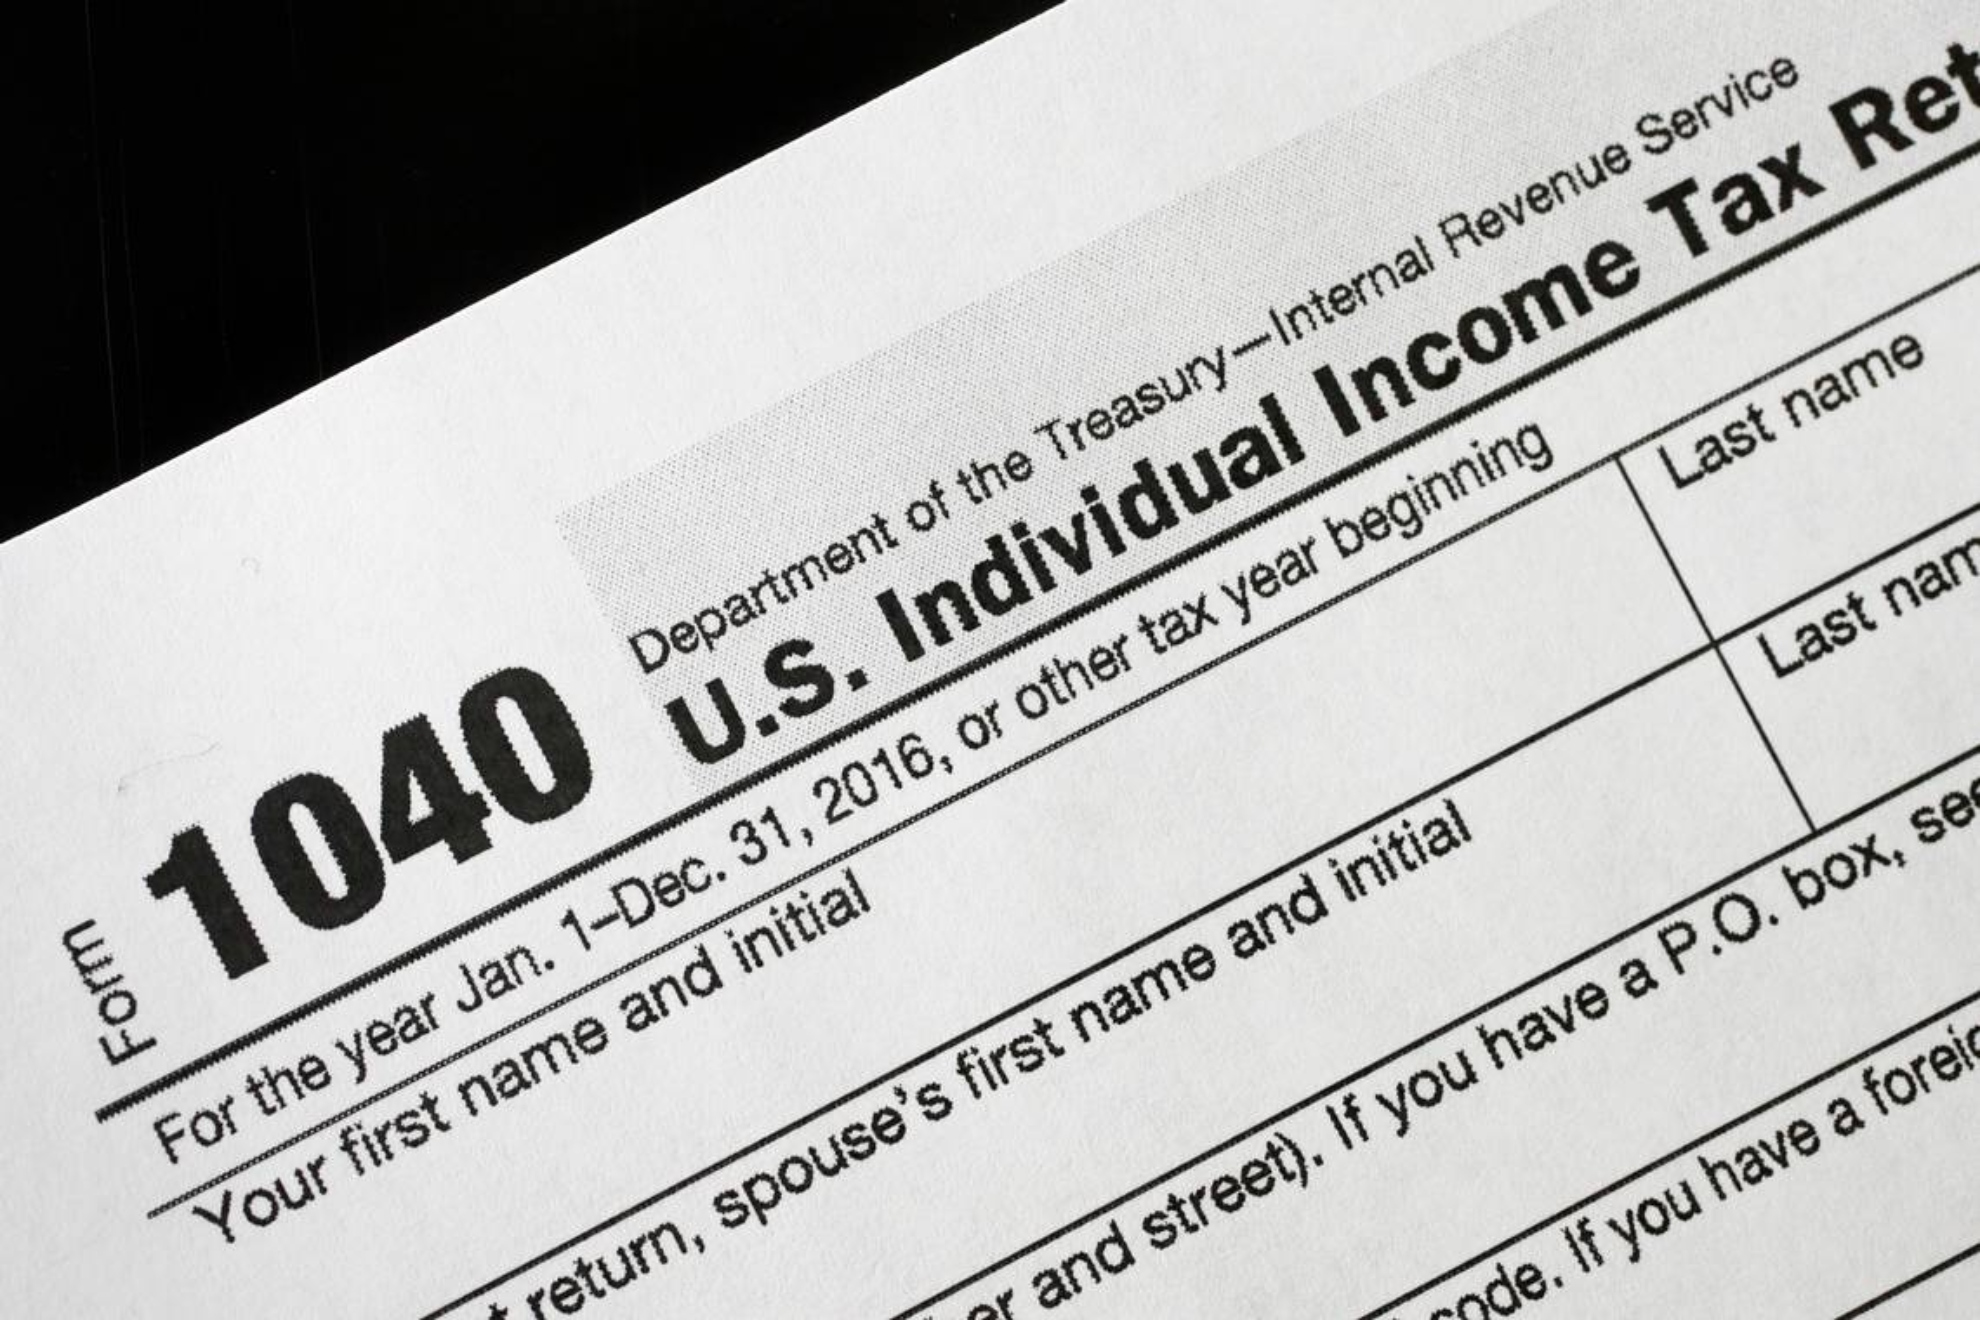 California Tax Return: What is the new deadline to file your taxes?